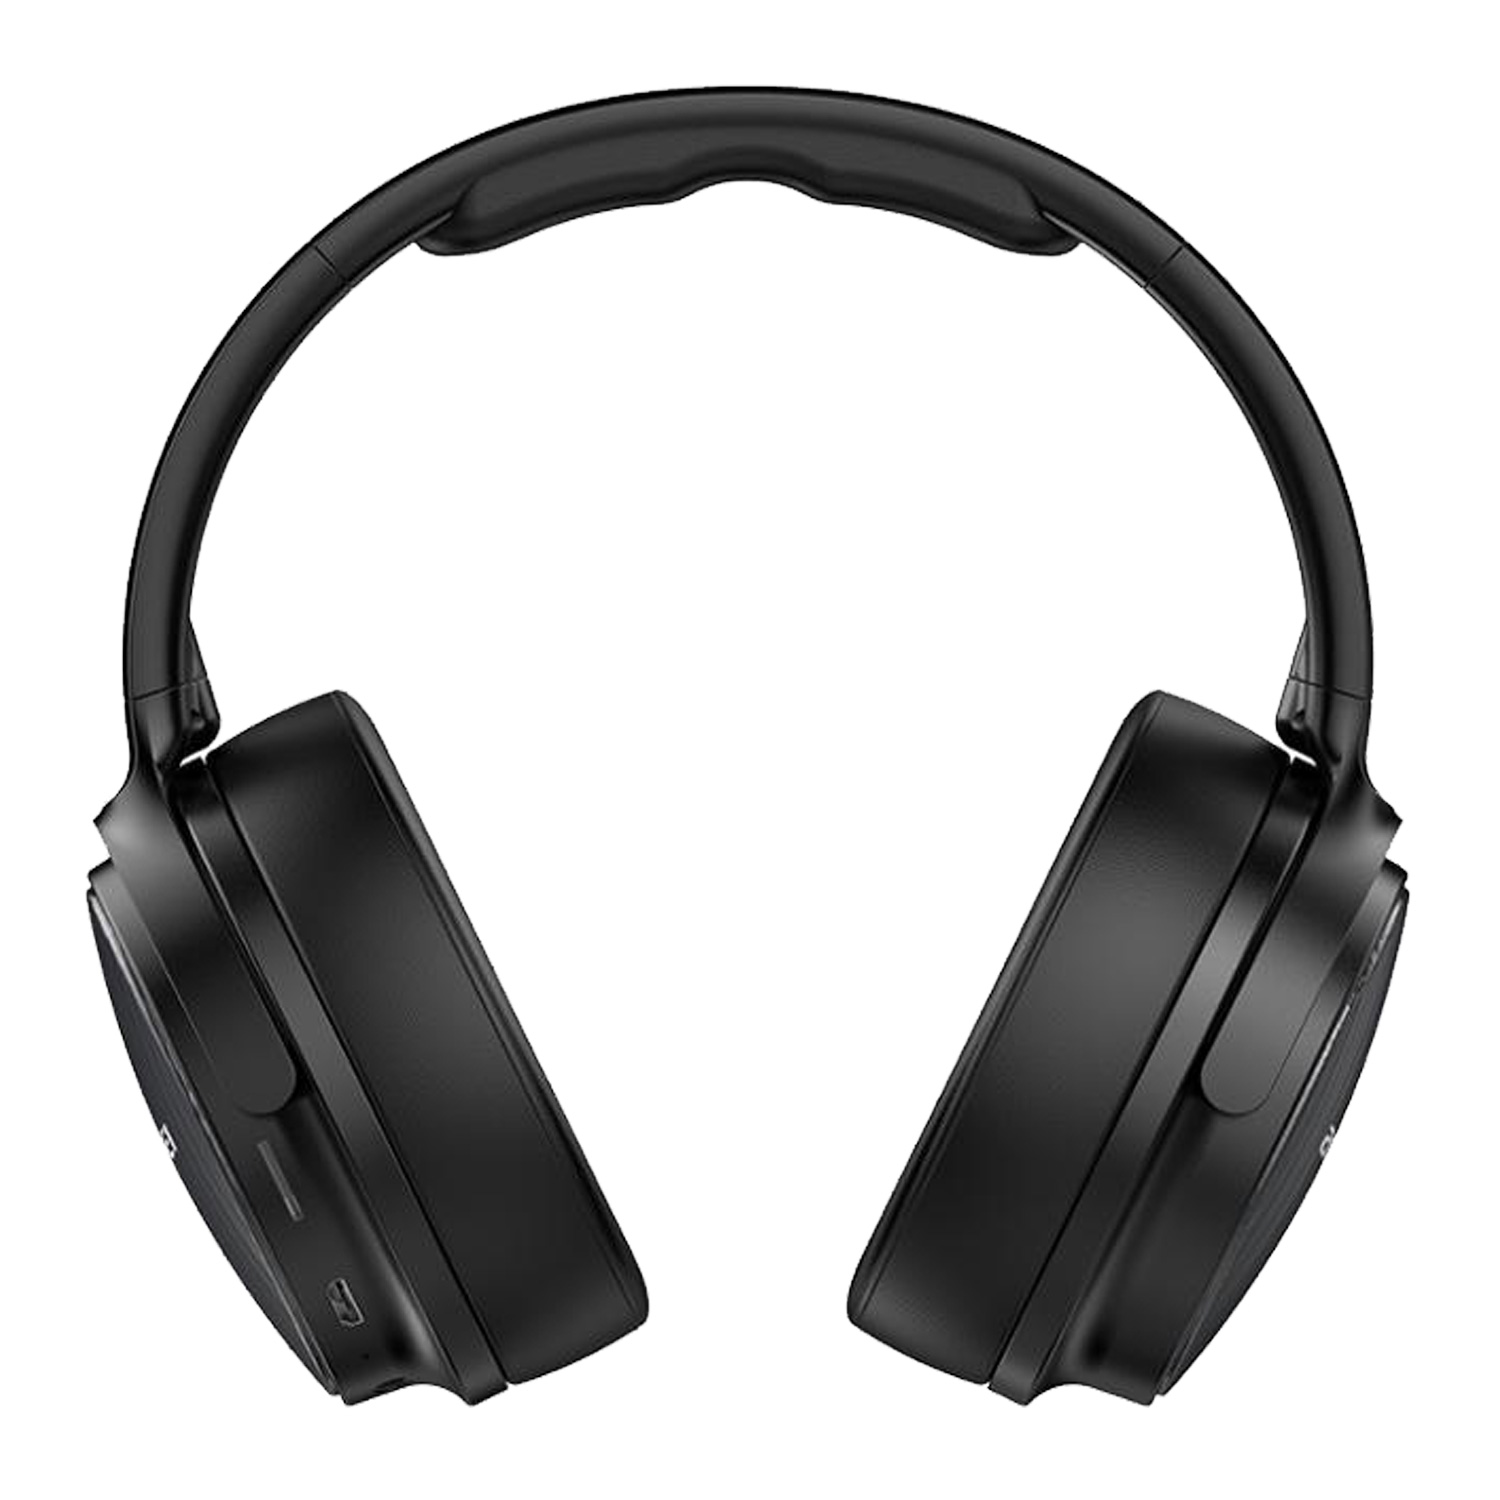 Specification: AWEI A780BL Bluetooth 5.0 Headphones + AUX Foldable